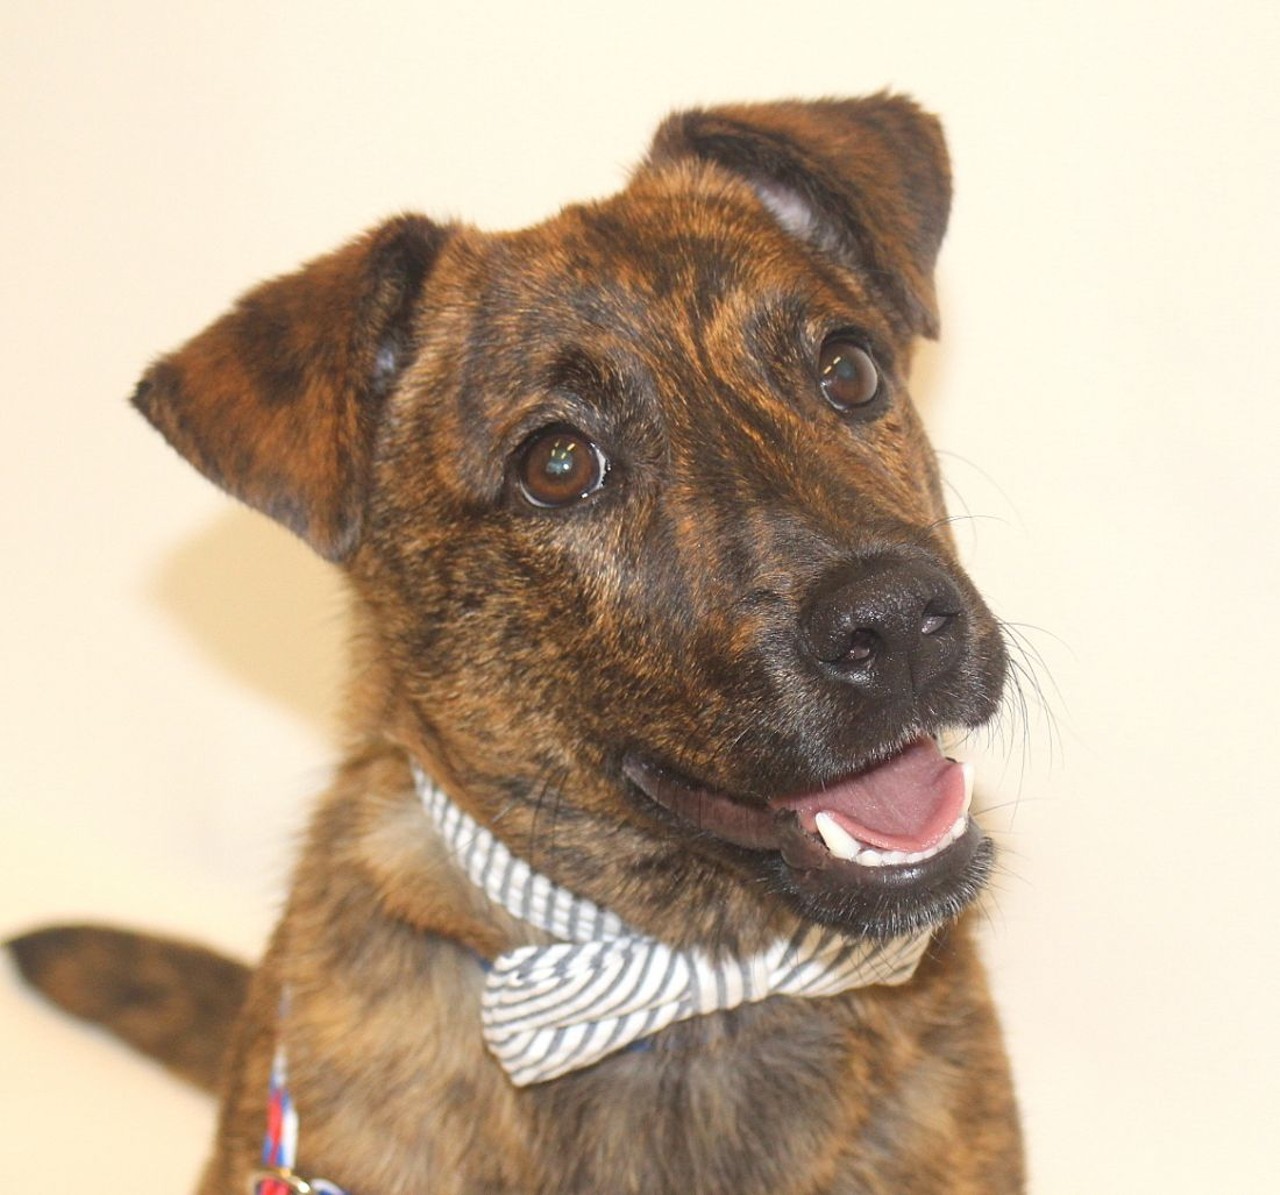 NAME: Tiger Tim 
GENDER: Male 
BREED: Labrador-Dachshund mix 
AGE: 8 months 
WEIGHT: 24 pounds
SPECIAL CONSIDERATIONS: Tiger Tim prefers to be your only dog.
REASON I CAME TO MHS: Agency transfer 
LOCATION: Mackey Center for Animal Care in Detroit 
ID NUMBER: 866276 